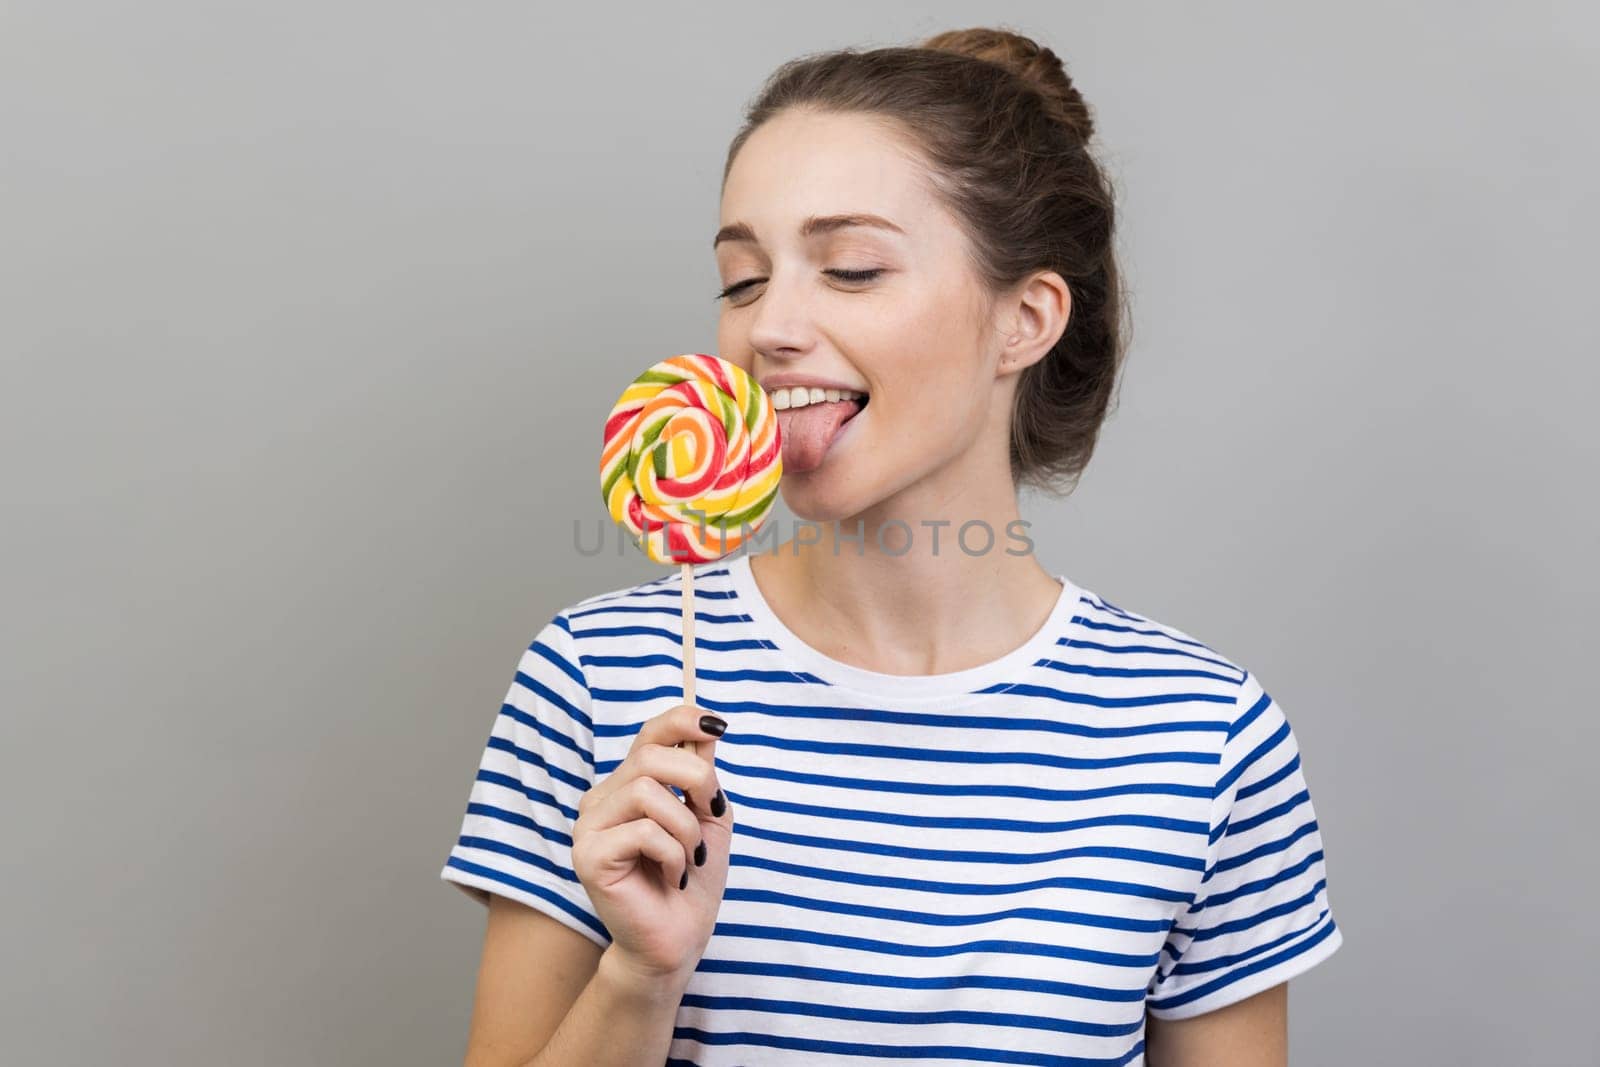 Woman standing with tongue out, dreaming and tempted to taste lollipop, round sweet rainbow candy. by Khosro1